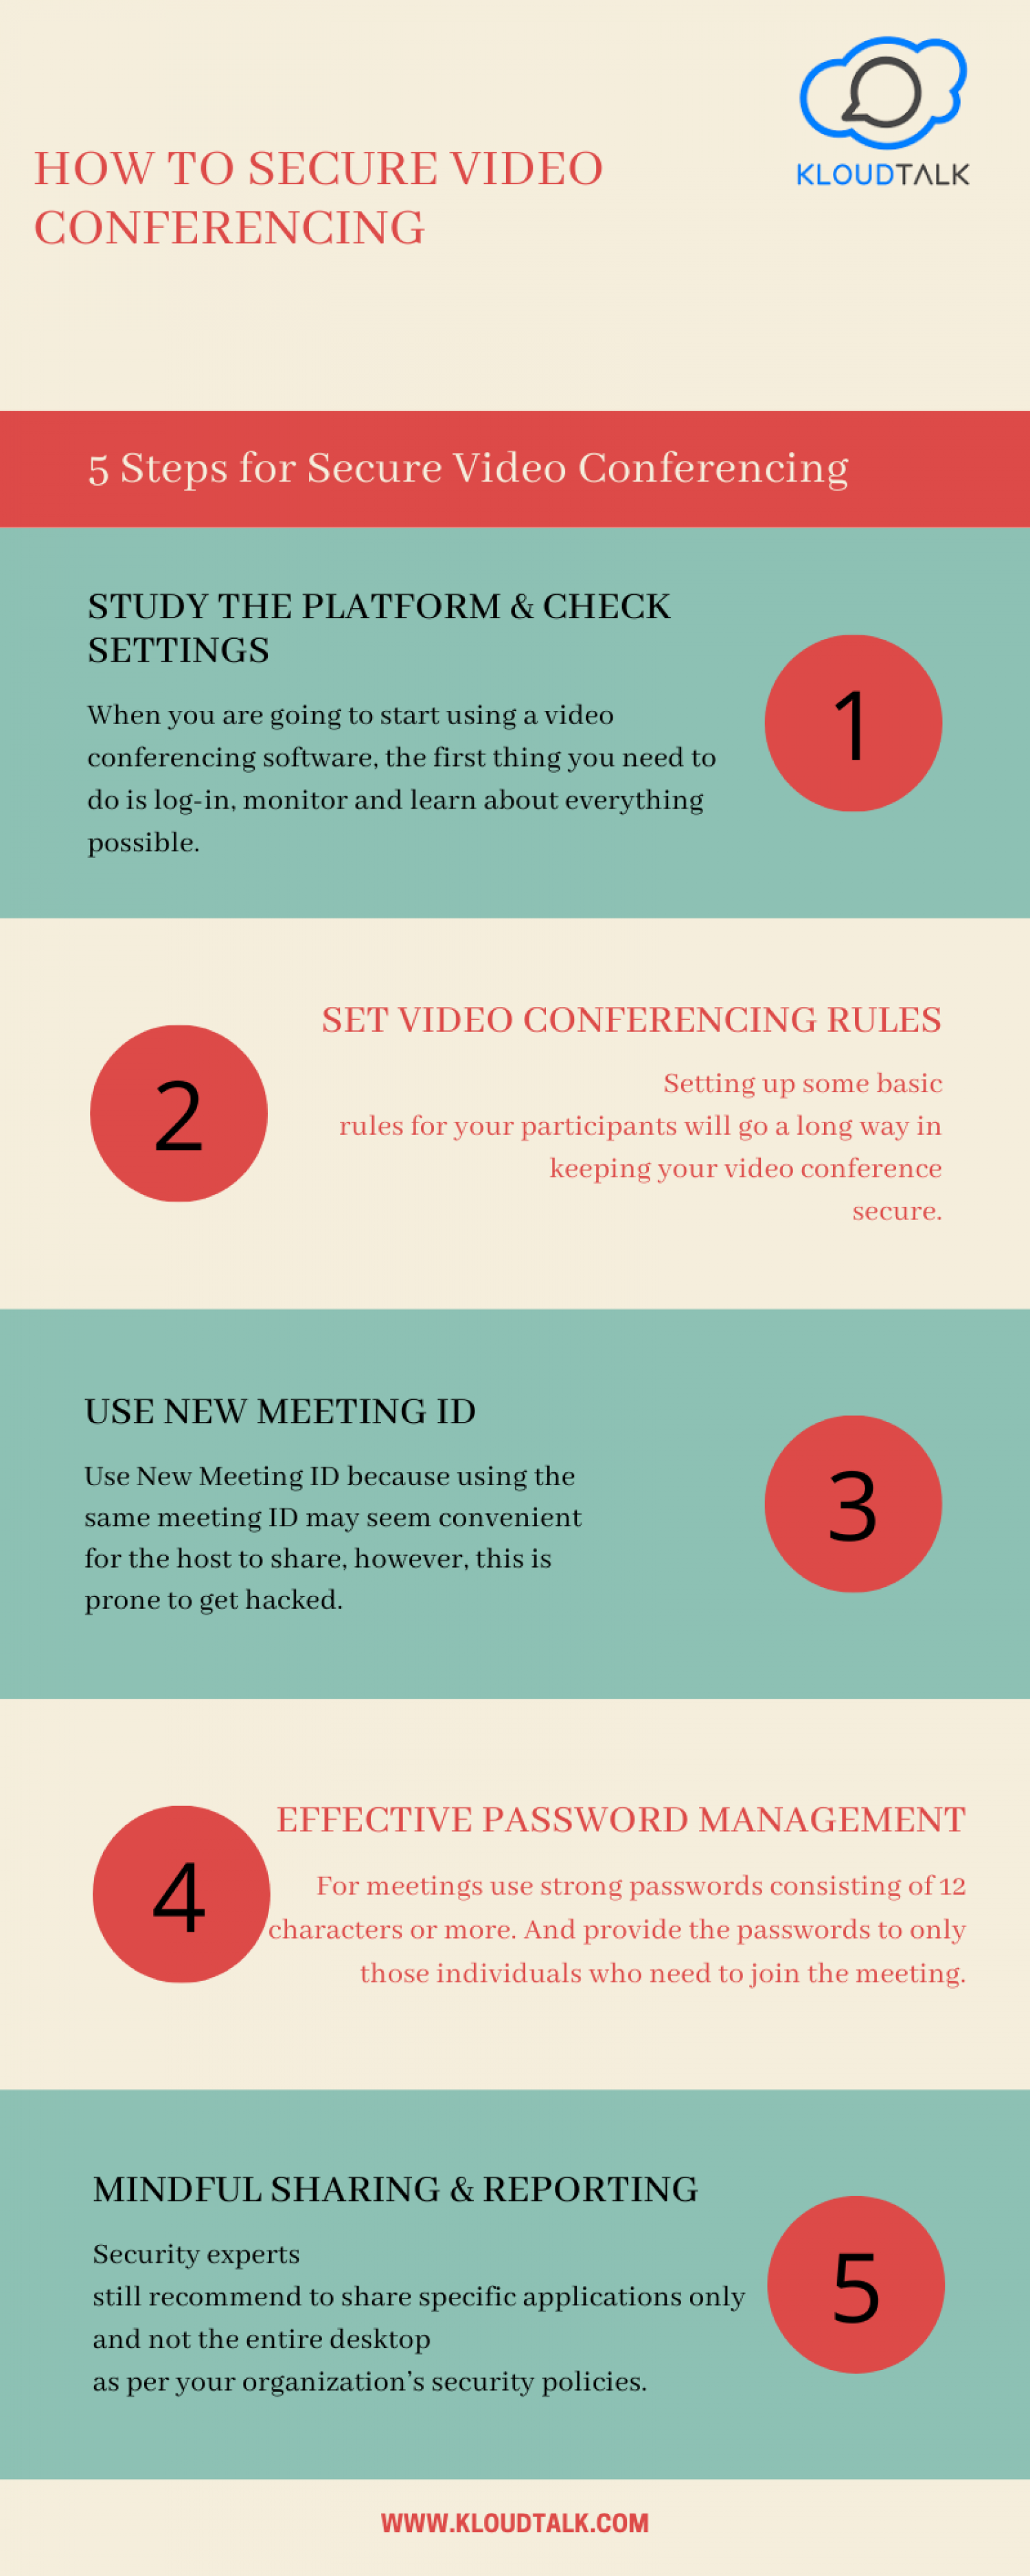 How to Secure Video Conferencing Infographic